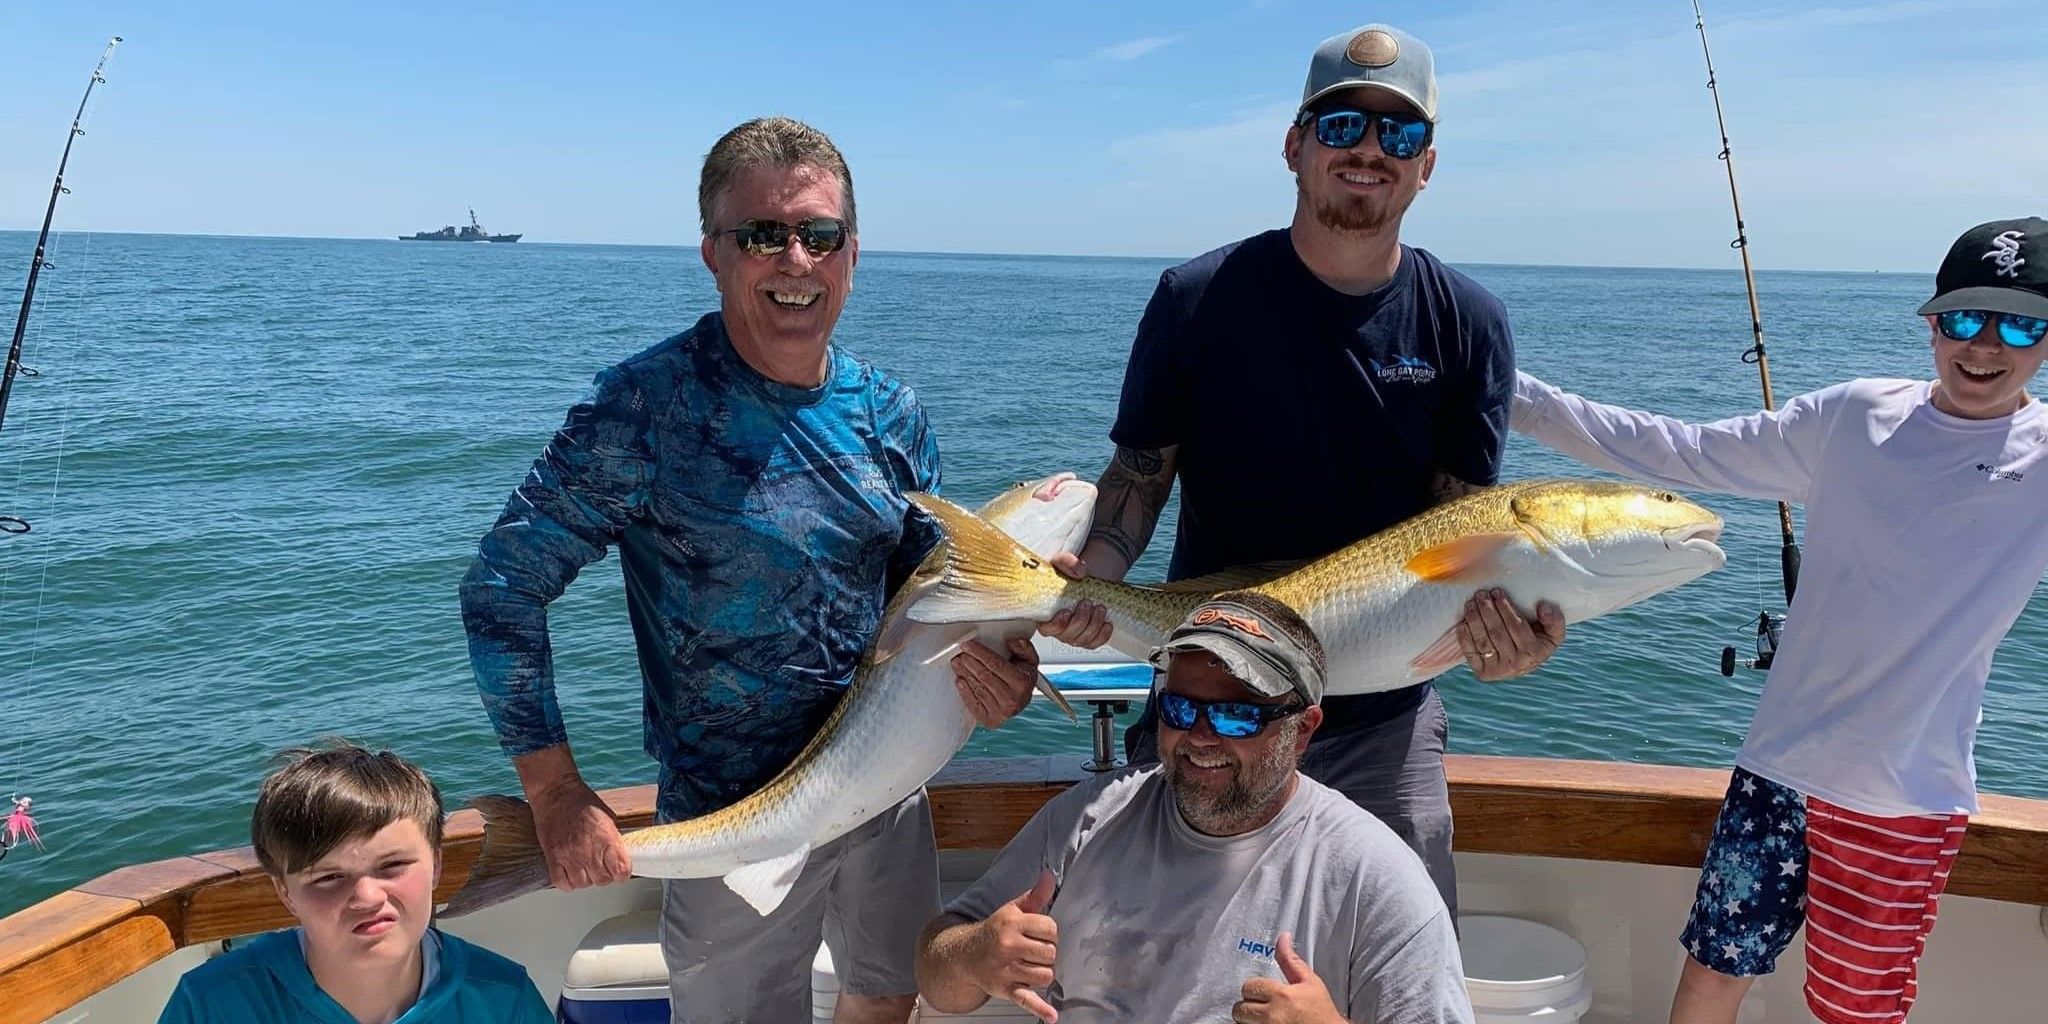 Havoc Charters Fishing Charters on Chesapeake Bay | Morning 4 Hour Charter Trip fishing Offshore